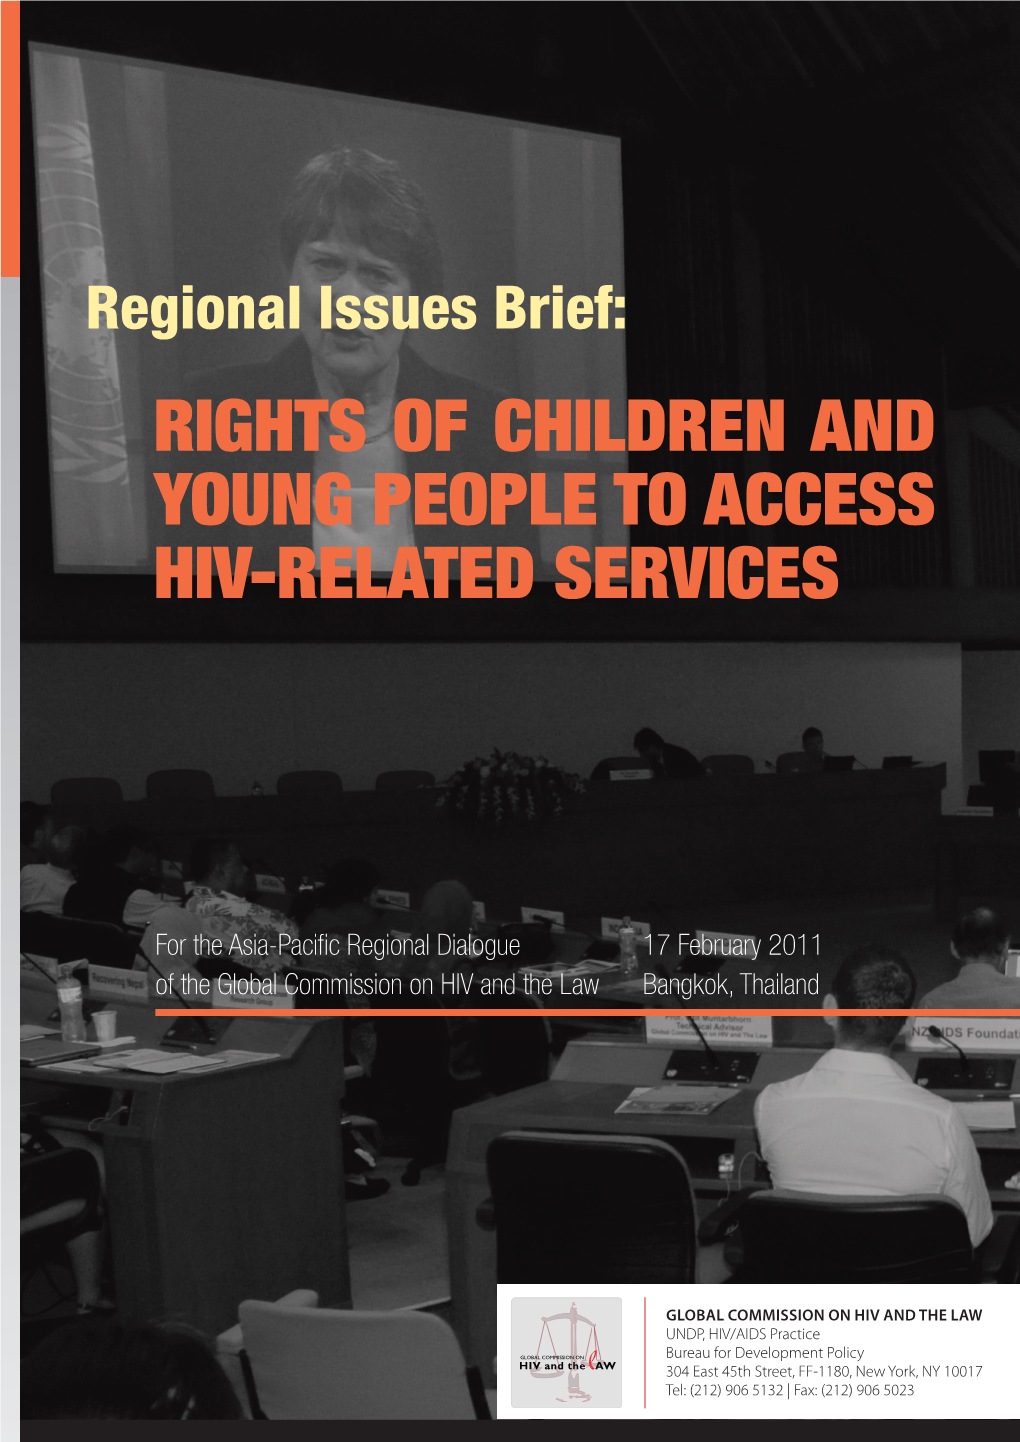 Rights of Children and Young People to Access Hiv-Related Services